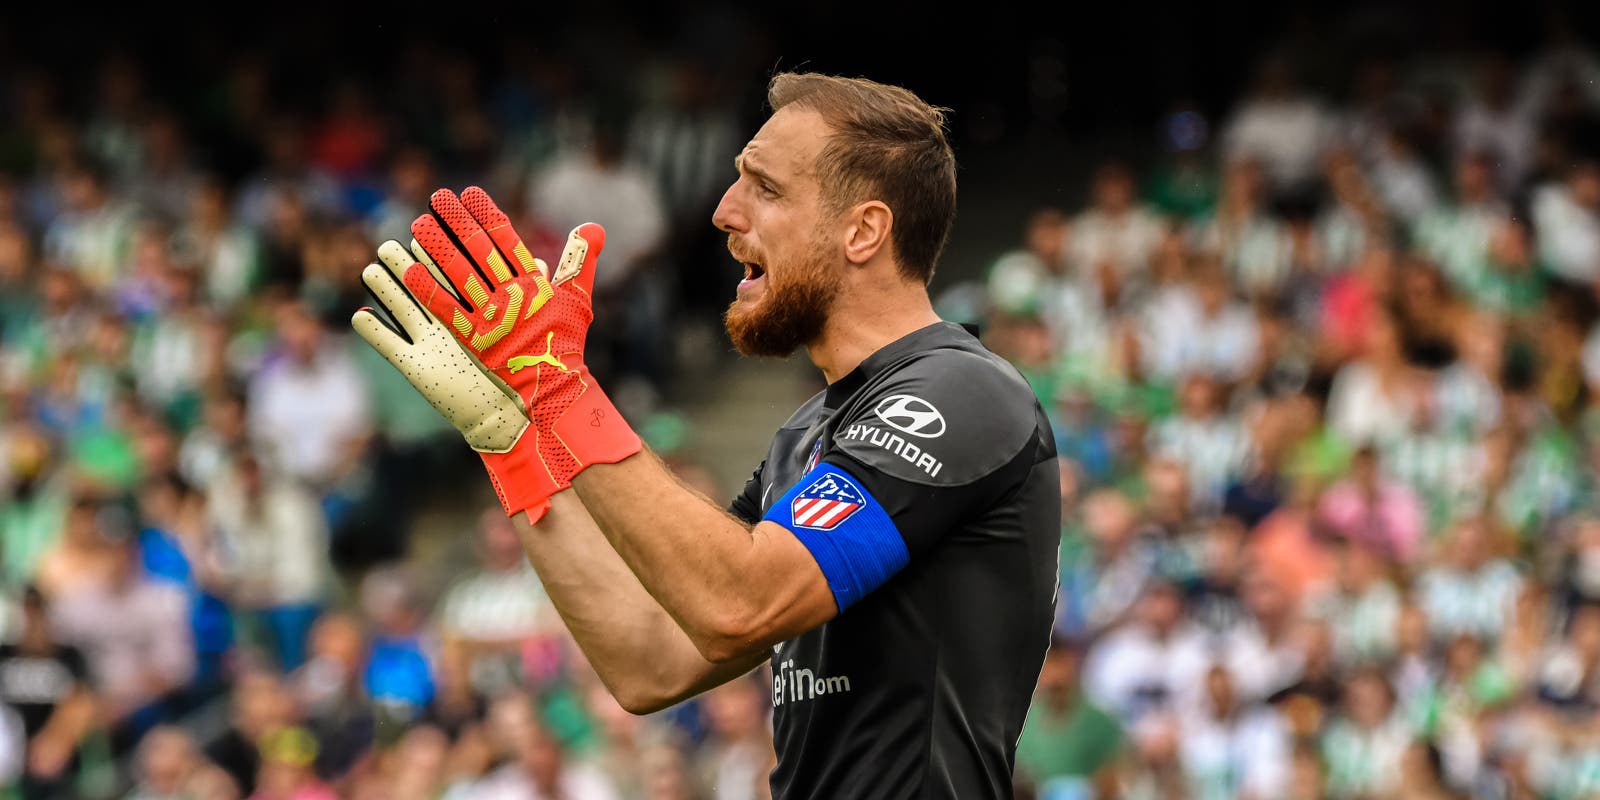 Atlético's drastic decision with Oblak: there are signings that cannot be missed
	
